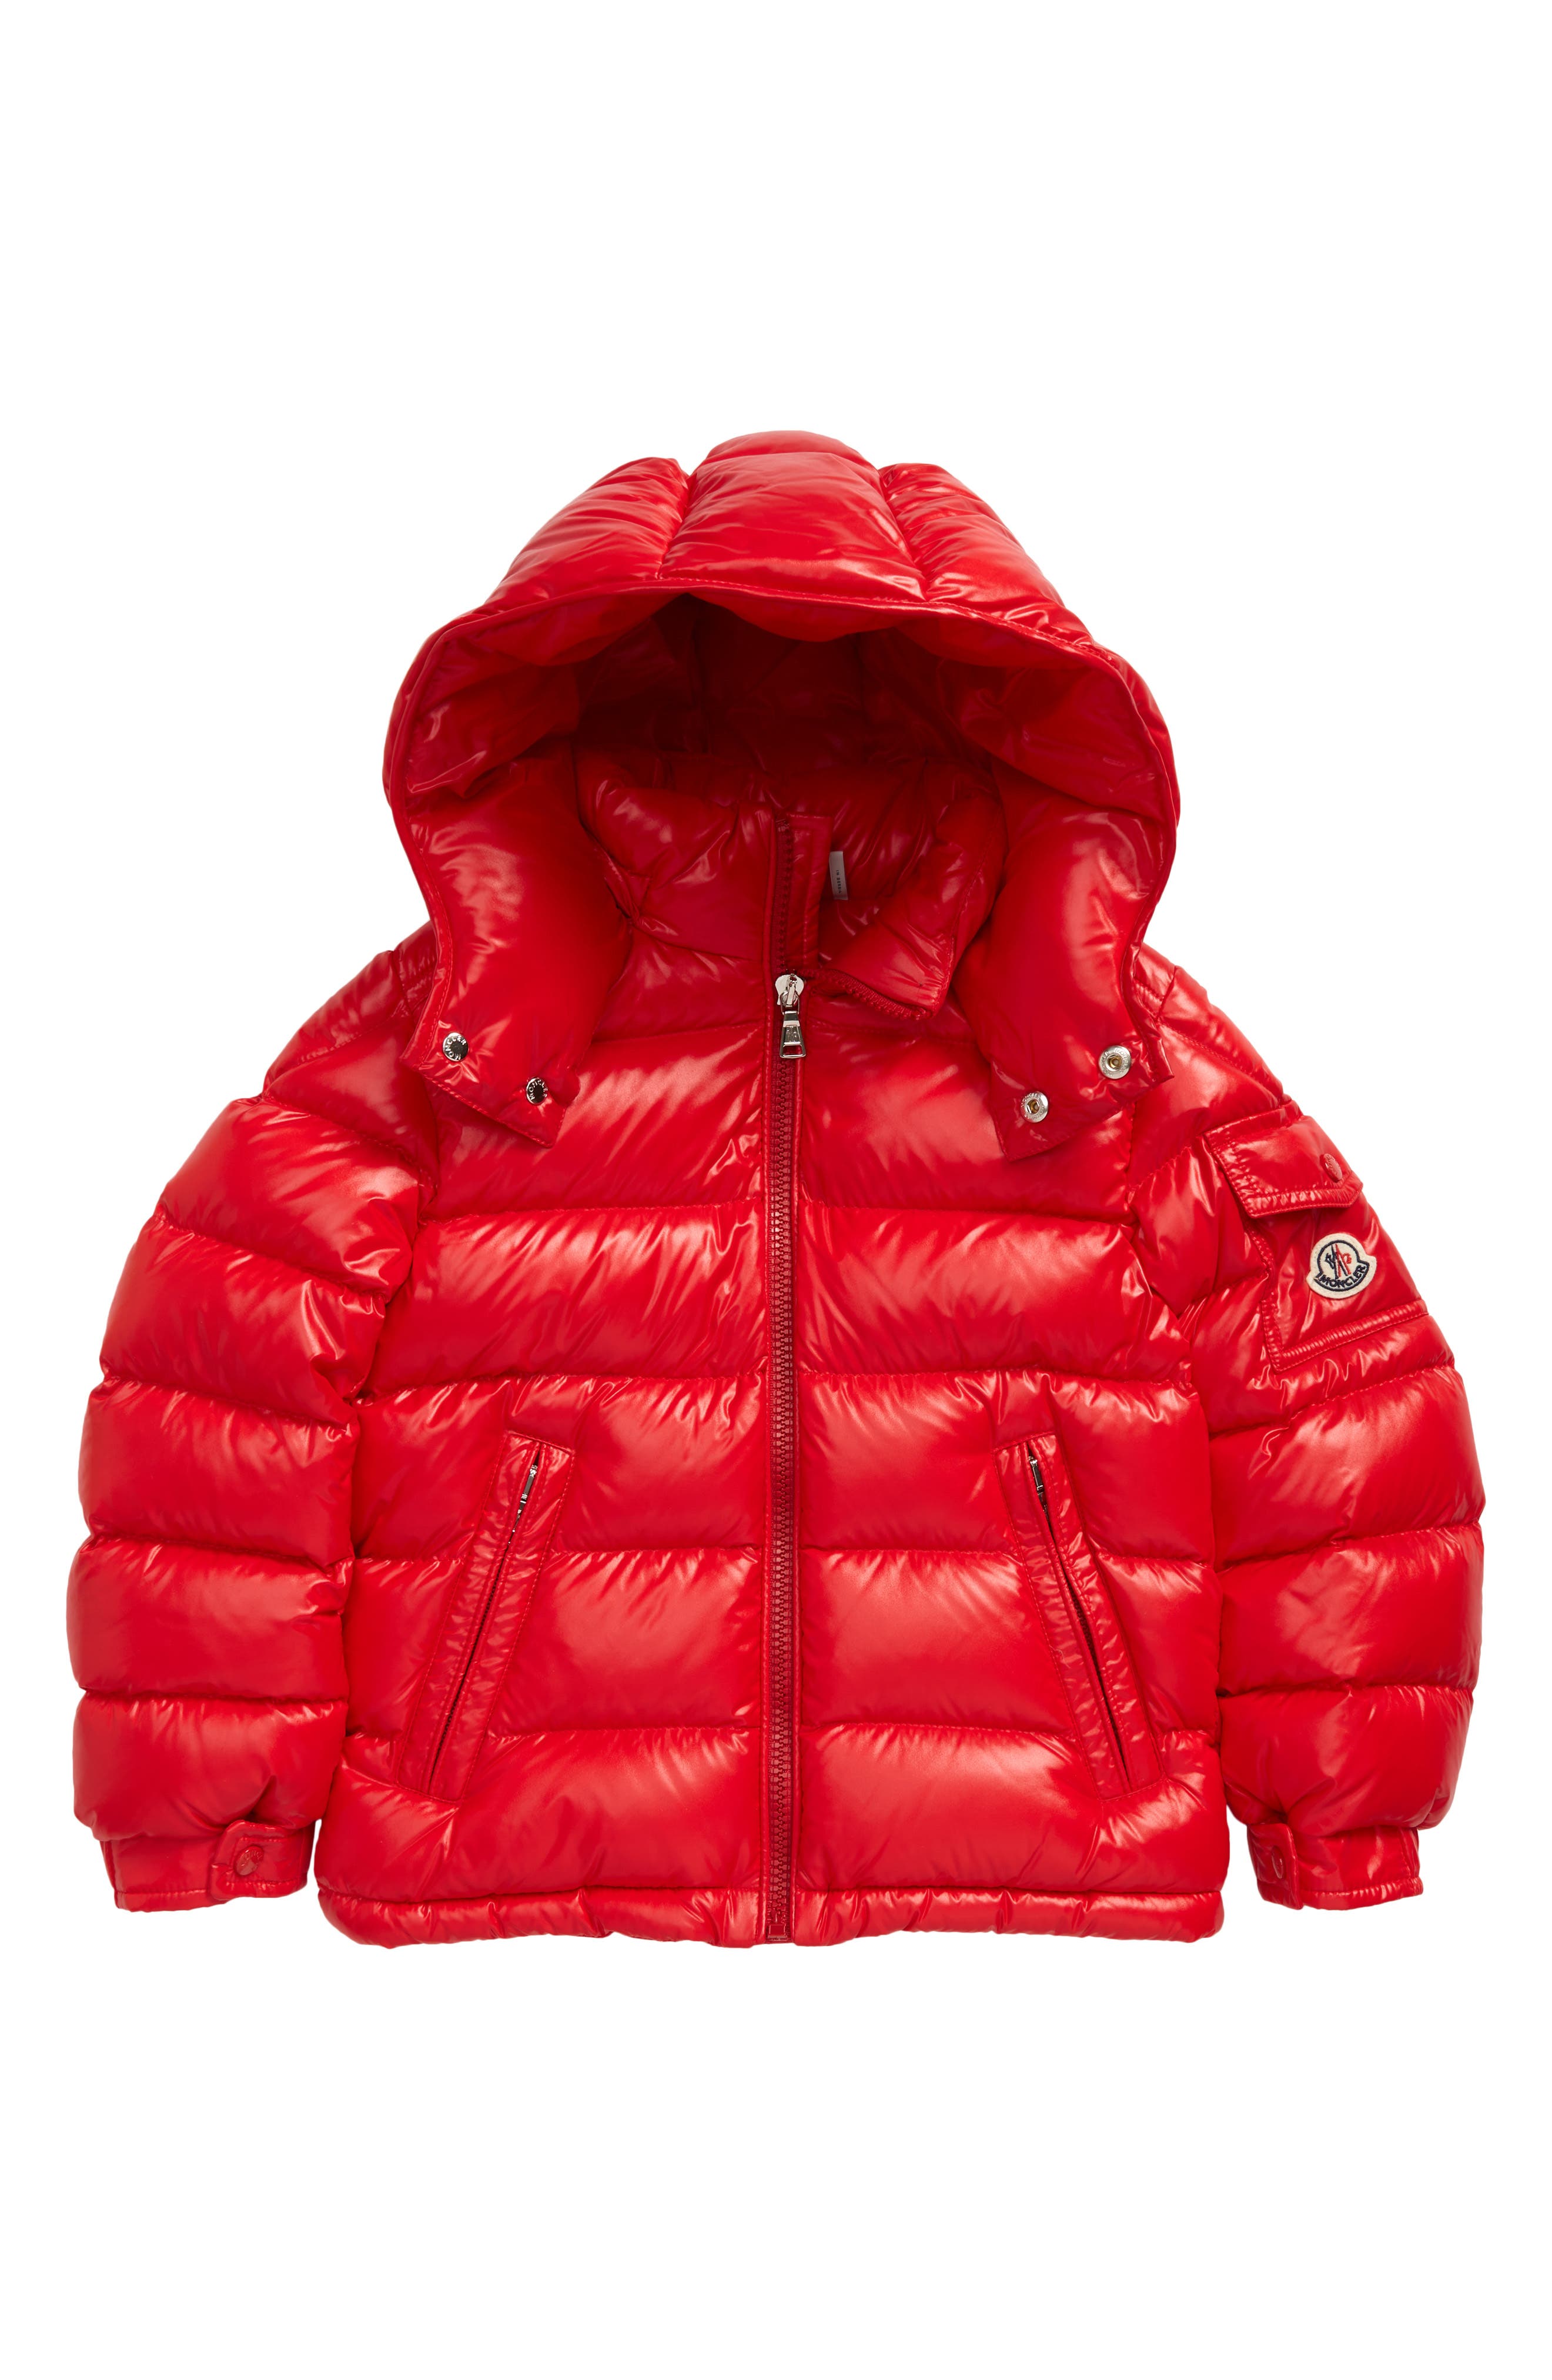 Red Girl's Coats, Jackets ☀ Outerwear ...